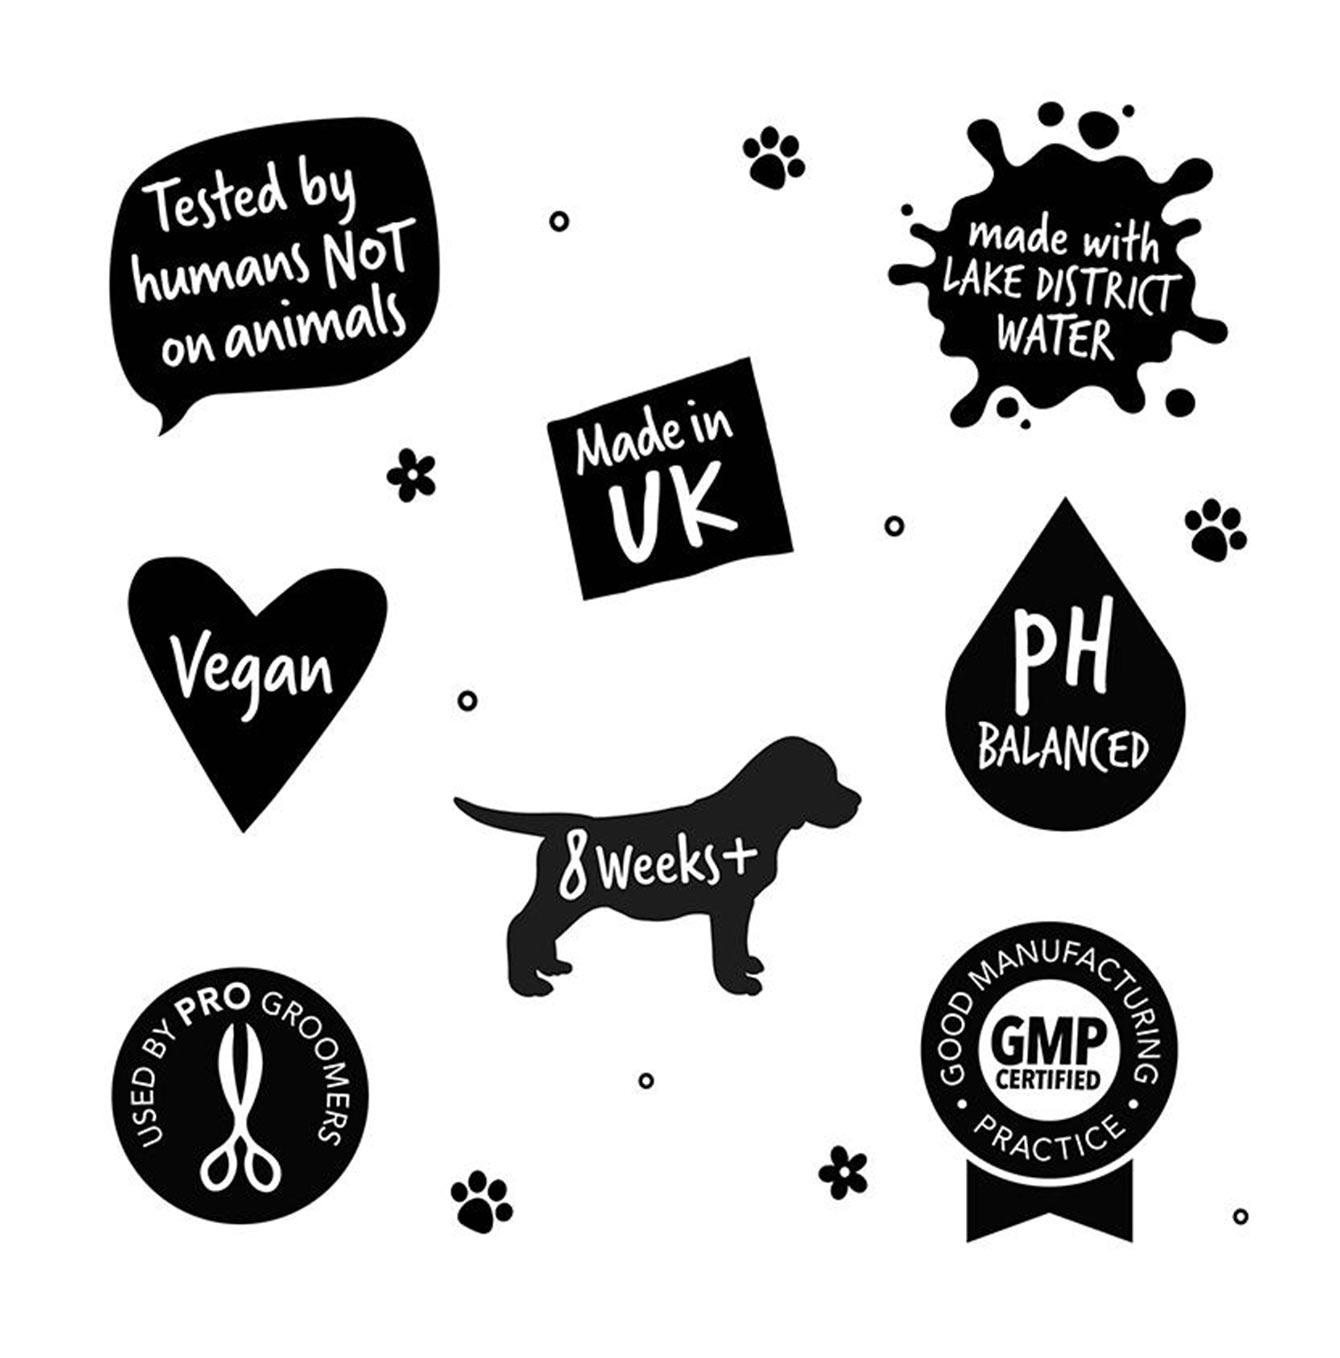 Bugalugs Baby Fresh Dog Cologne Perks Vegan Tested on Humans Made In The UK PH Balanced GMP Certified 